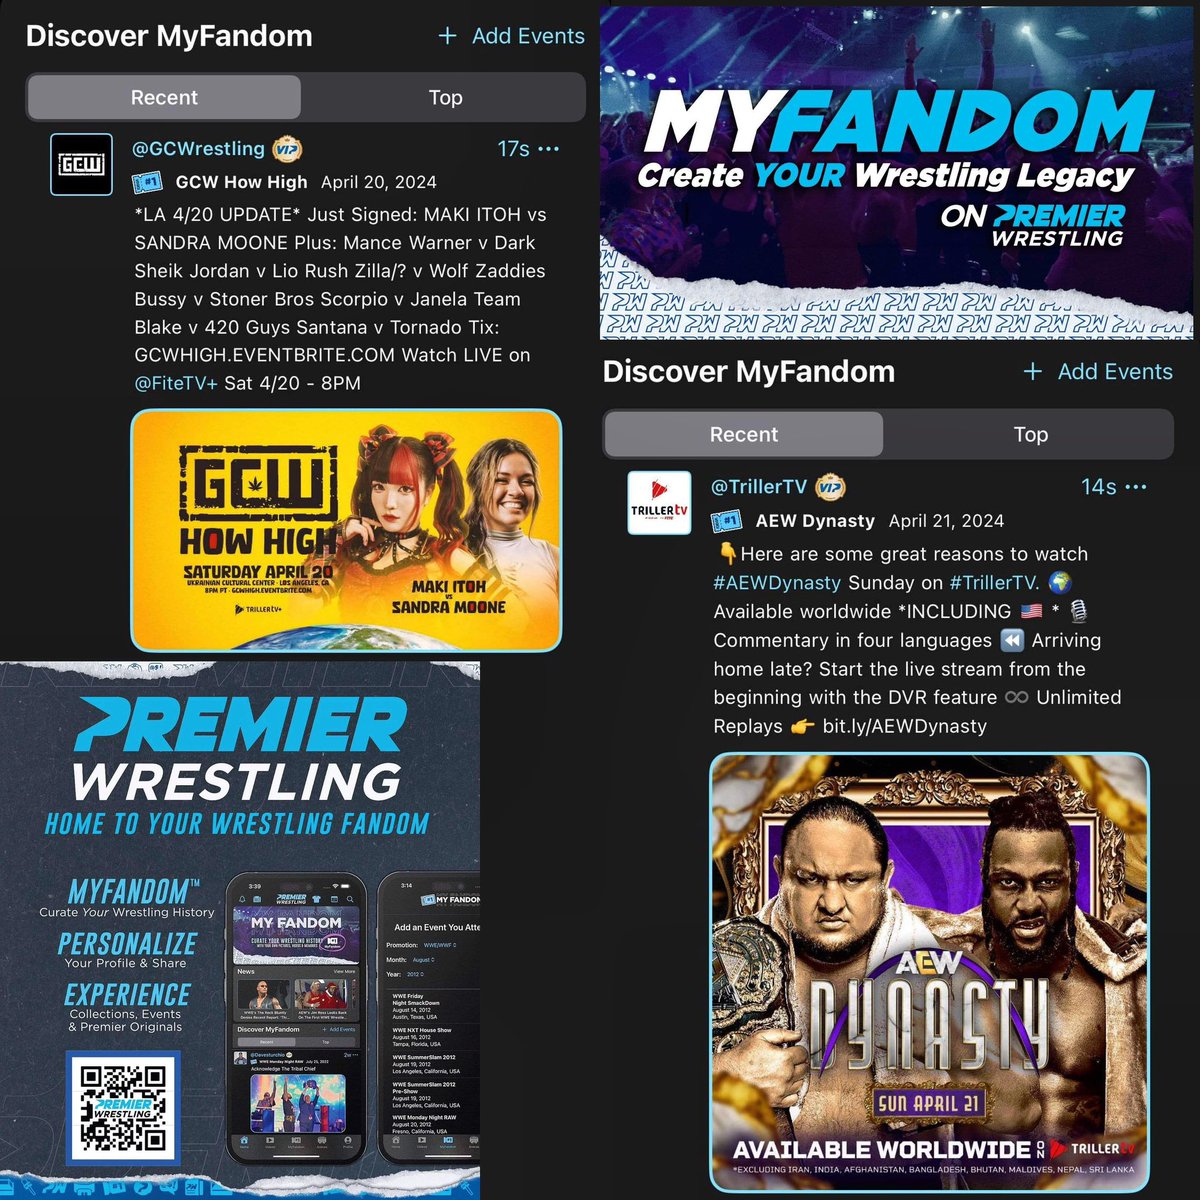 Two HUGE events going down this weekend! Are you headed to California for @GCWrestling_ ?Going to St. Louis for @aew ! Head on over to #MyFandom to post your pictures and videos from those events on the Premier Wrestling App!! We want to see both events all over our #MyFandom…